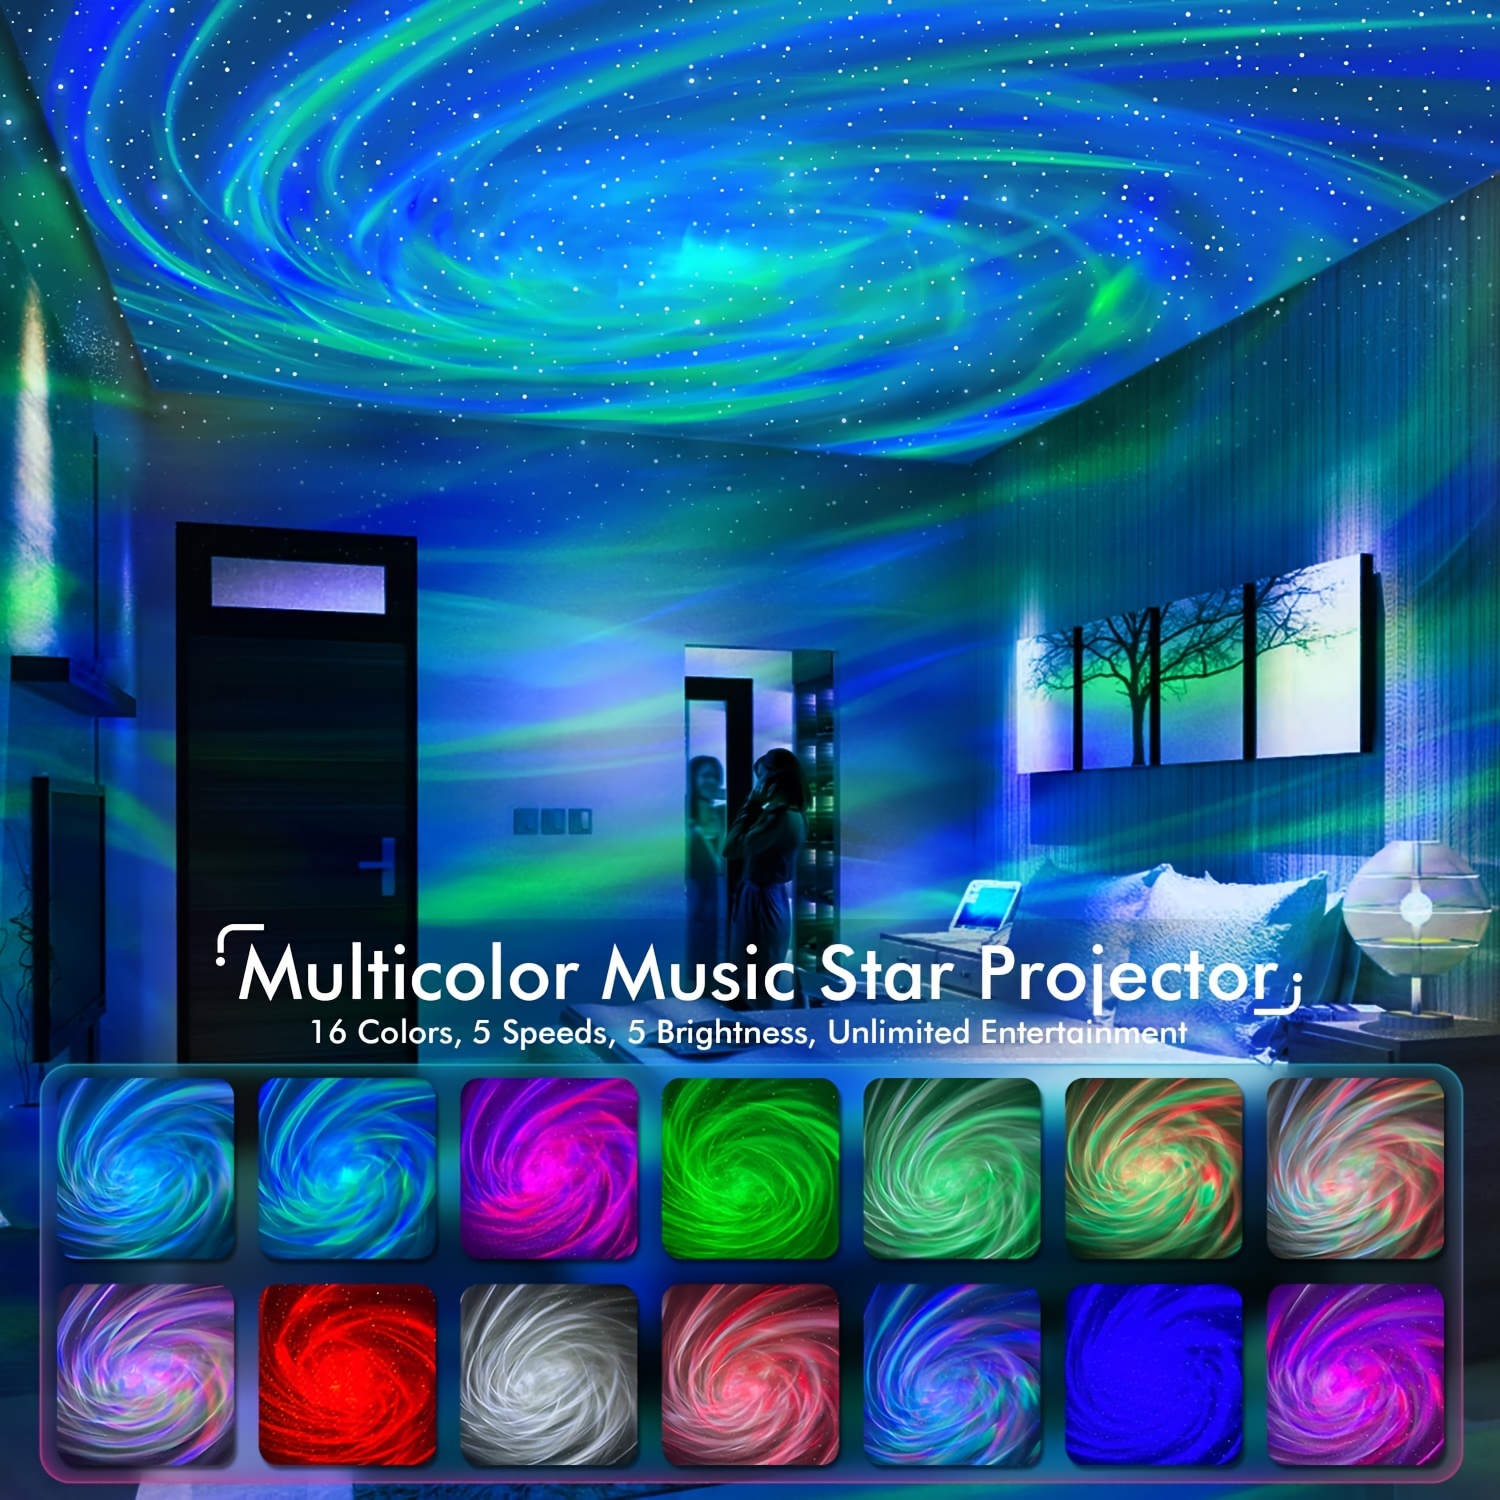 Star Projector, Rossetta Galaxy Projector for Bedroom, Bluetooth Speaker &  White Noise Aurora Projector, 14 Colors LED Night Lights for Kids Room,  Adults Home Theater, Ceiling, Aesthetic Room Decor